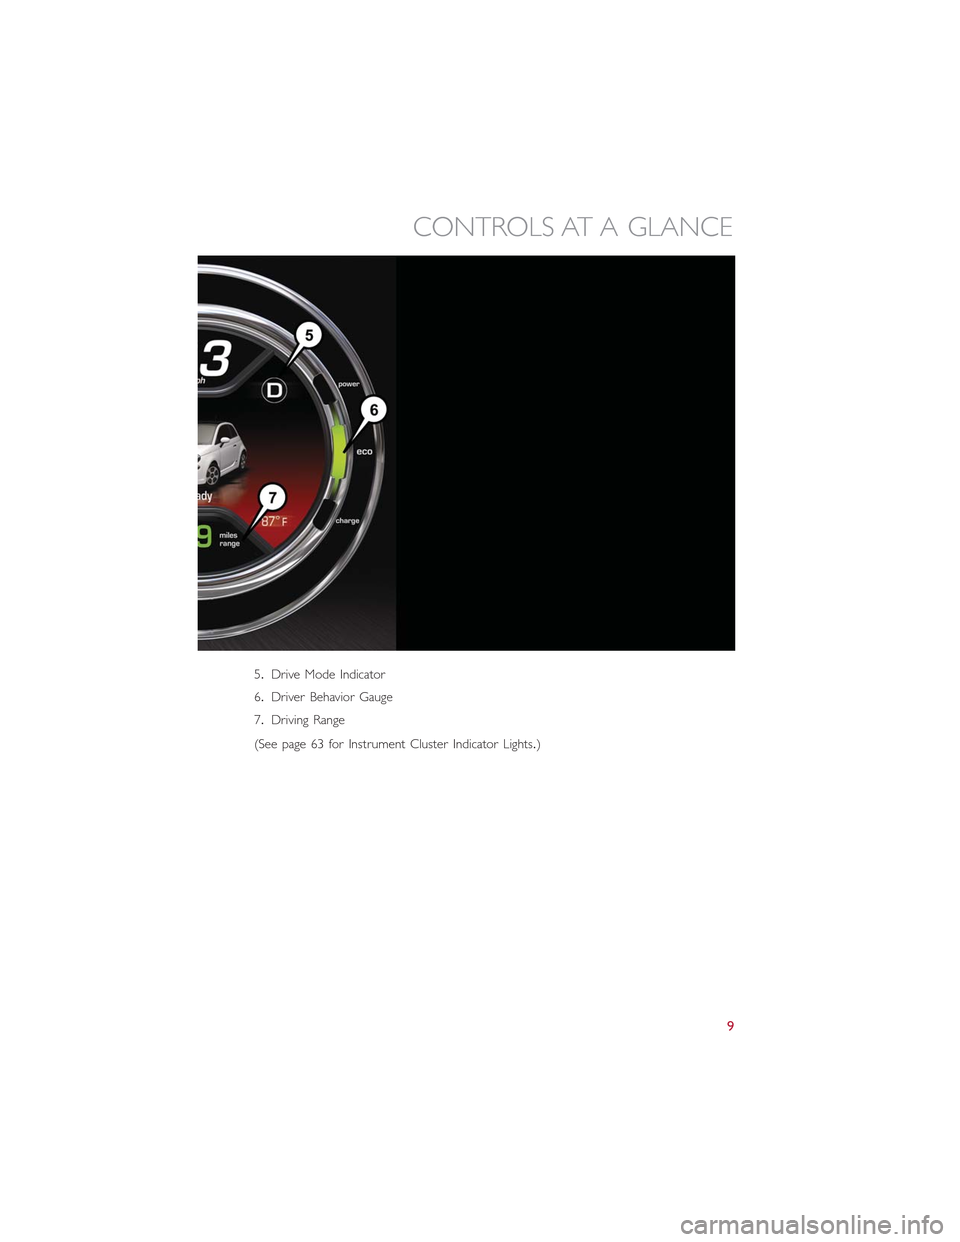 FIAT 500E 2015 2.G Owners Manual 5.Drive Mode Indicator
6.Driver Behavior Gauge
7.Driving Range
(See page 63 for Instrument Cluster Indicator Lights.)
CONTROLS AT A GLANCE
9 